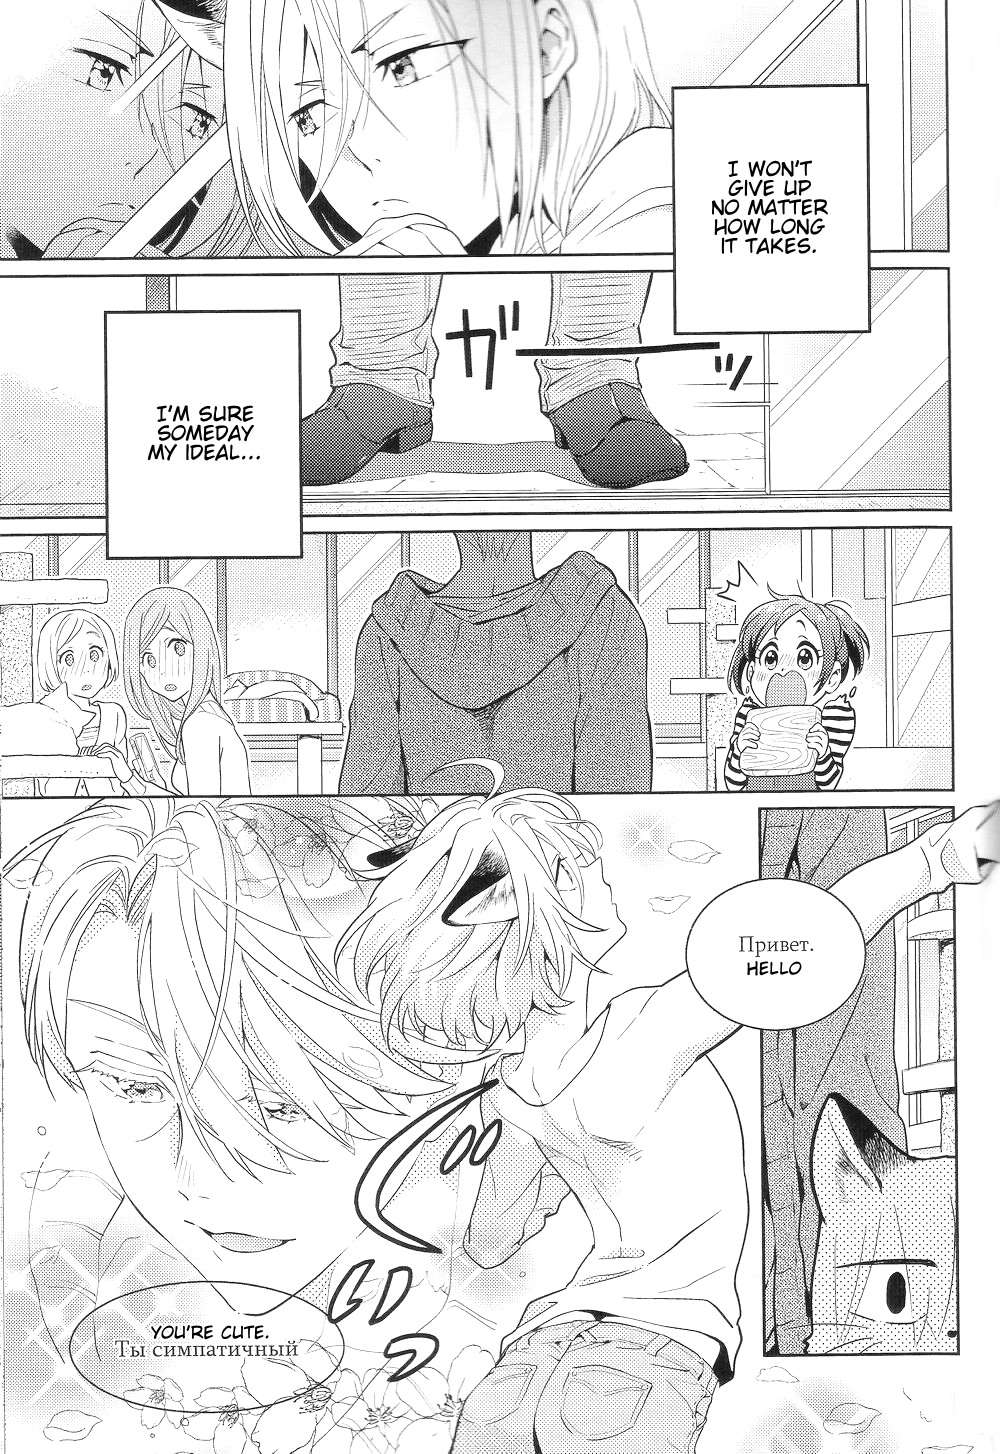 Yuri!!! on Ice - We Are Cats (Doujinshi) - chapter 1 - #6